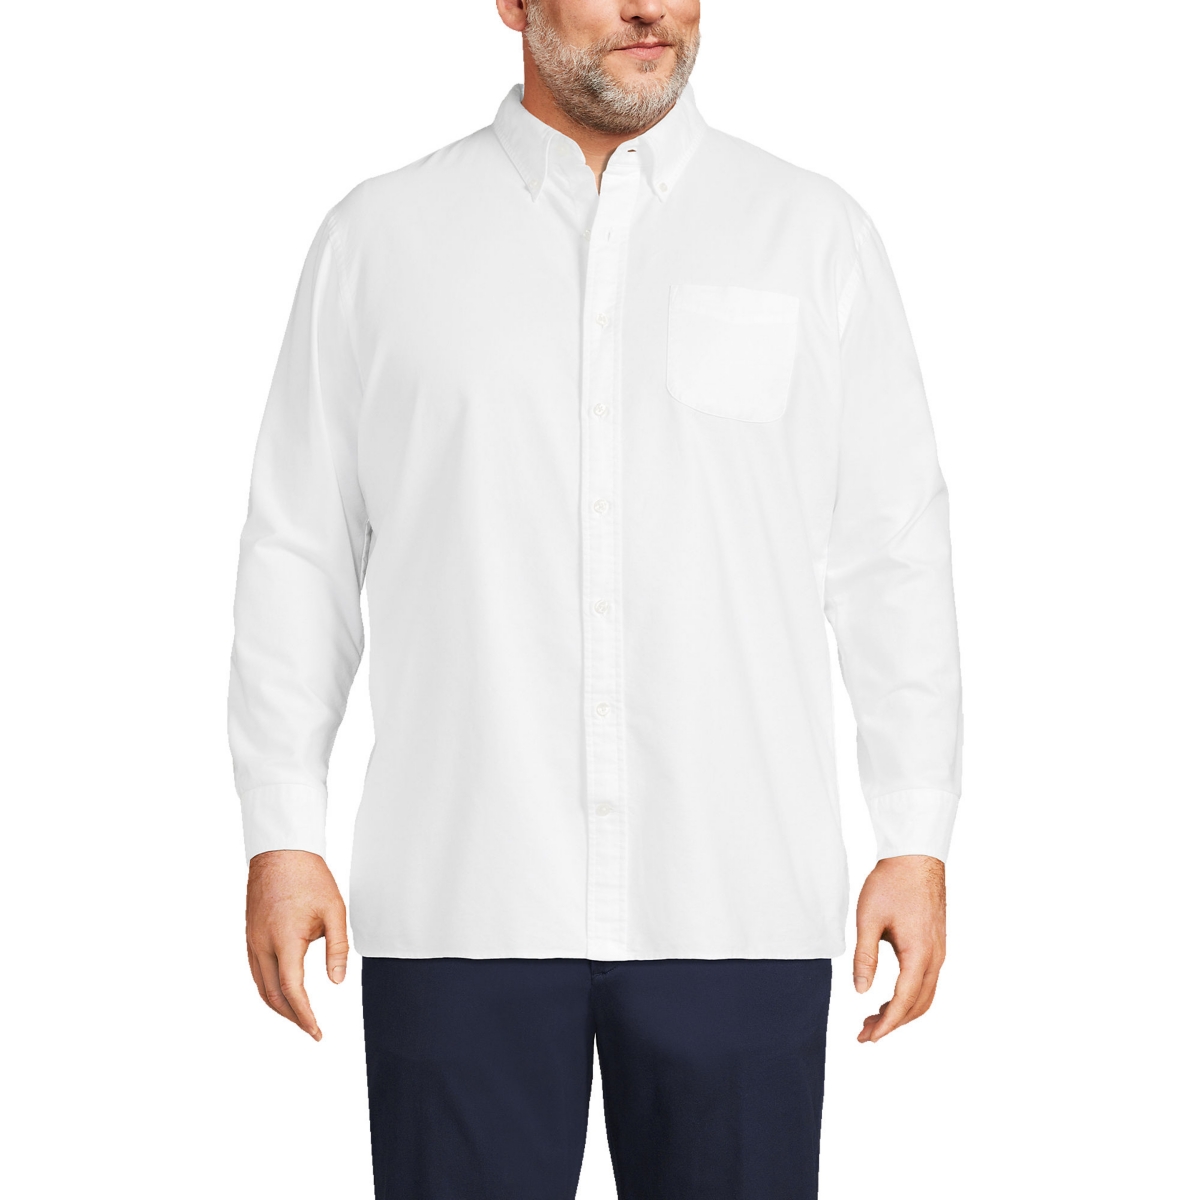 Big & Tall Traditional Fit Sail Rigger Oxford Shirt - White